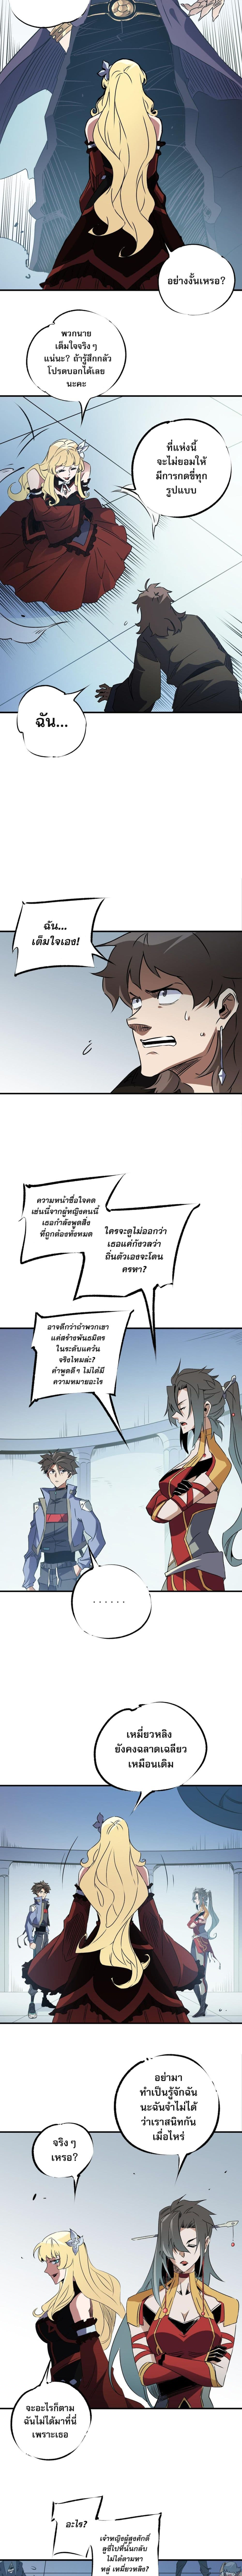 Job Changing for the Entire Population: The Jobless Me Will Terminate the Gods ฉันคือผู้เล่นไร้อาชีพที่สังหารเหล่าเทพ 62-62